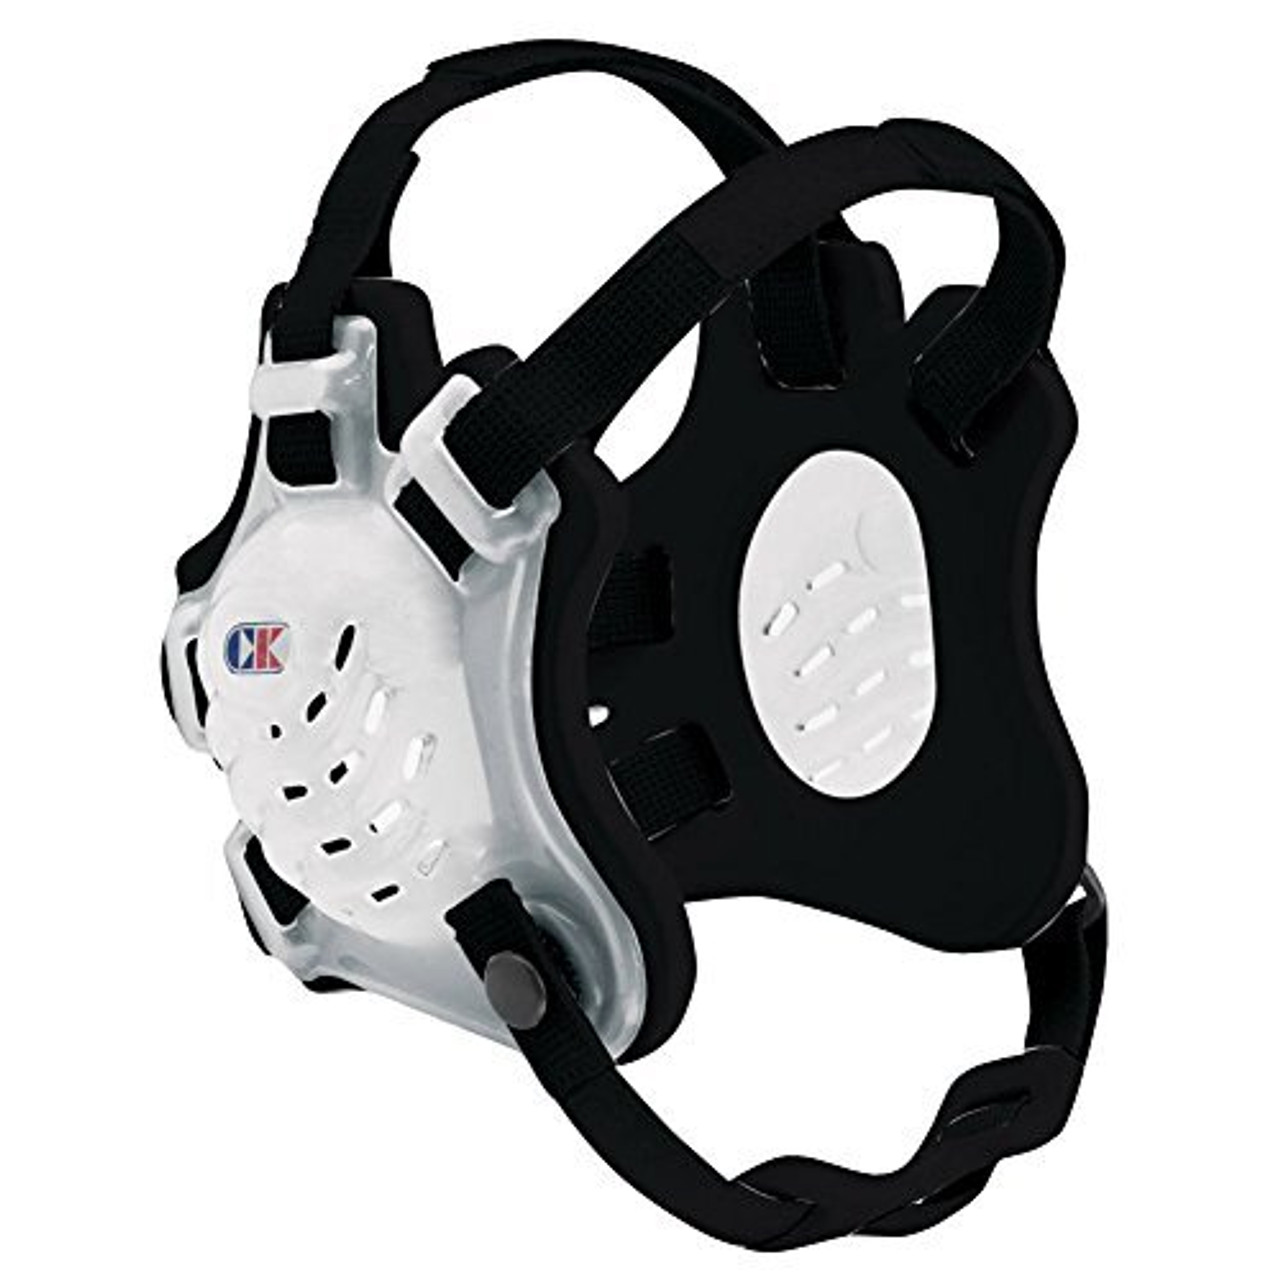 Cliff Keen Youth Signature Wrestling Headgear, Black - Gear2Compete